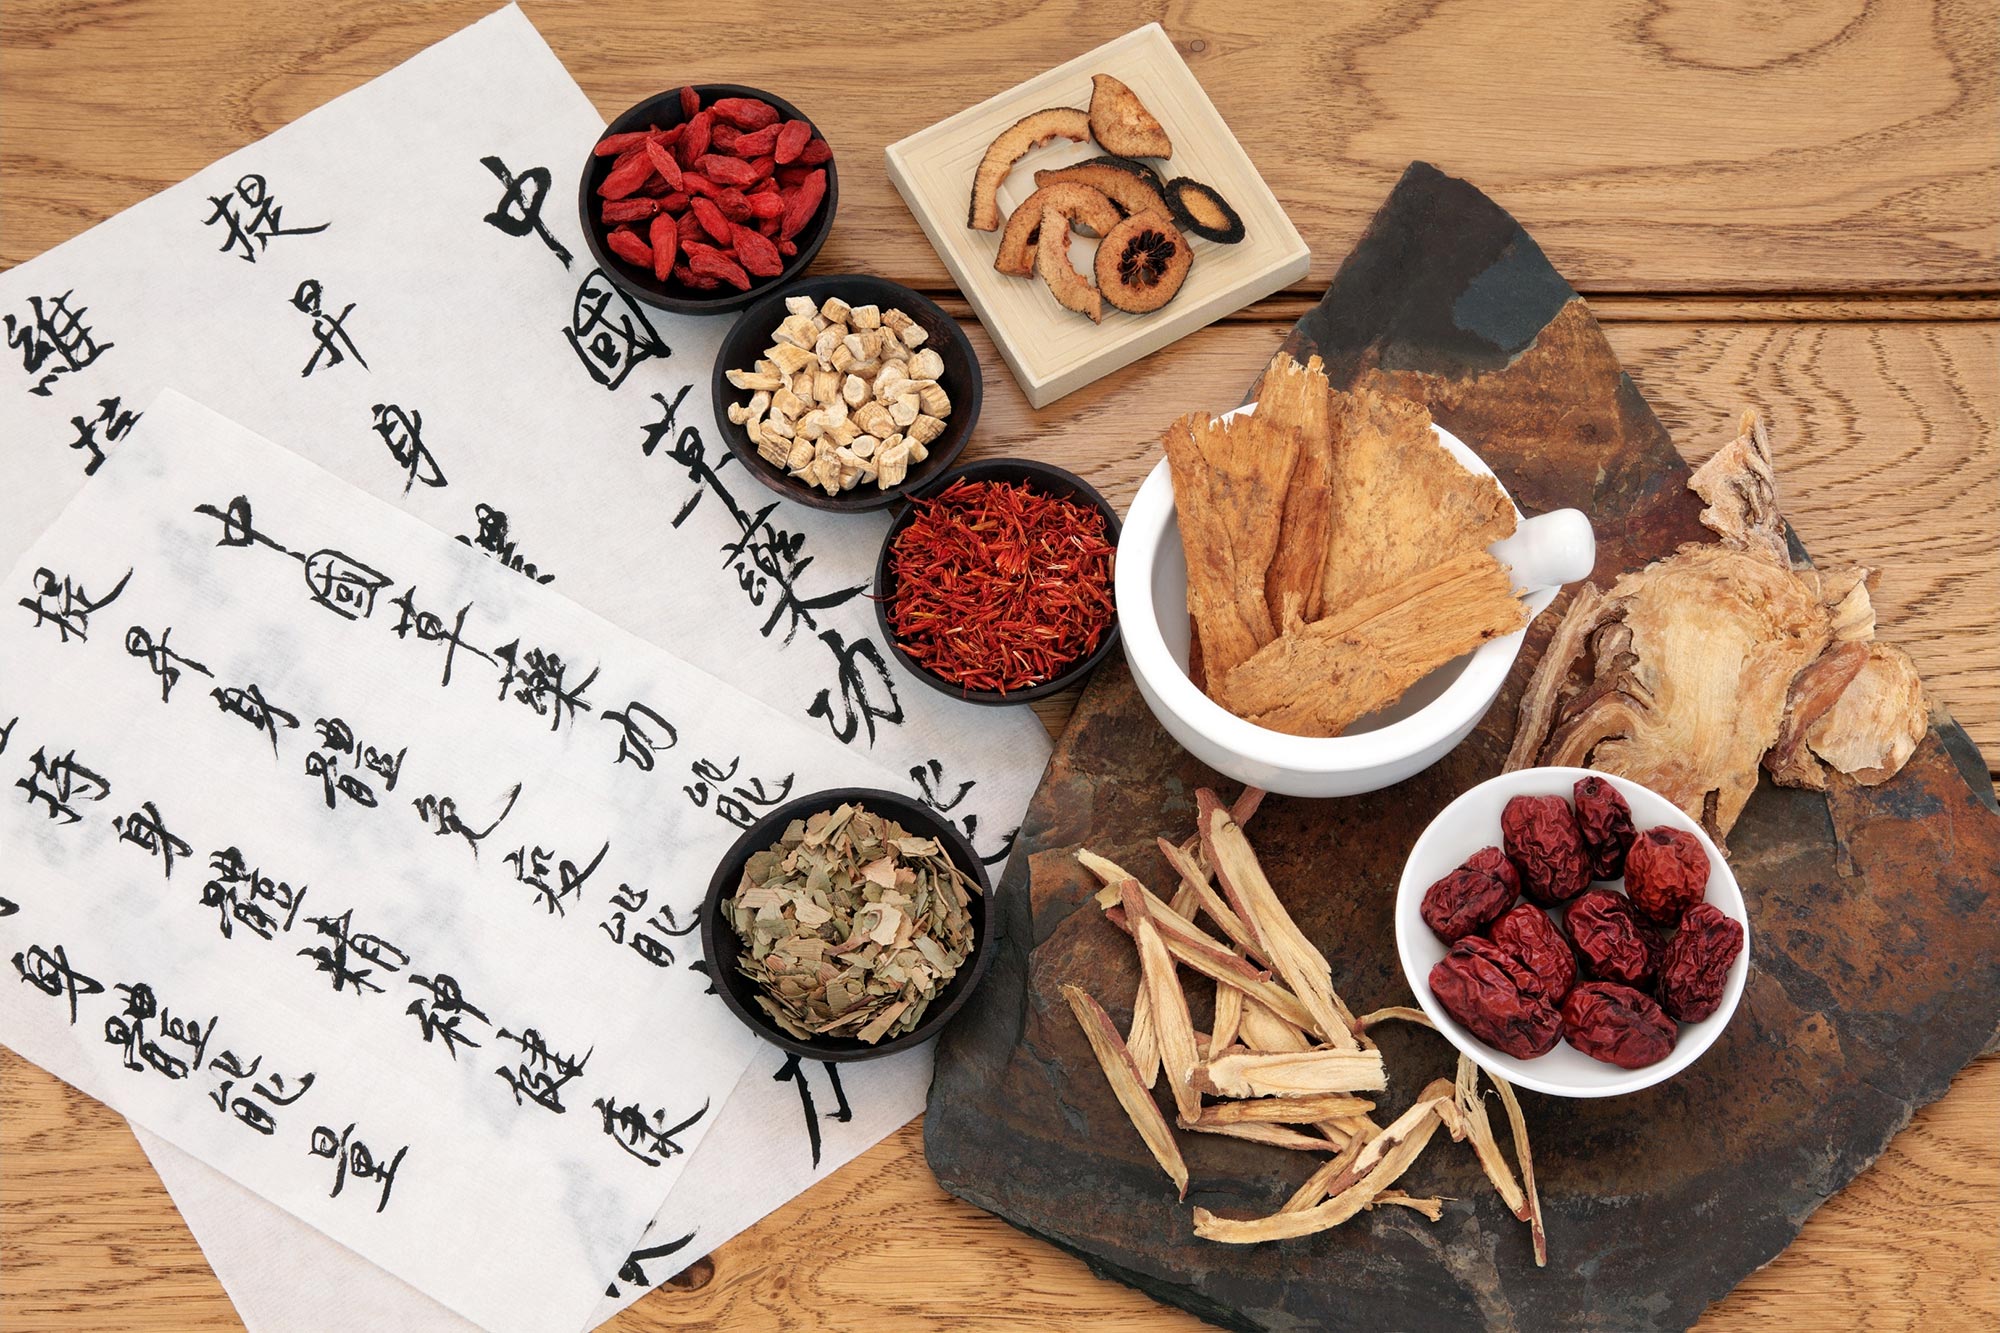 Revolutionary Brain Tumor Treatment Discovered in Traditional Chinese Medicine